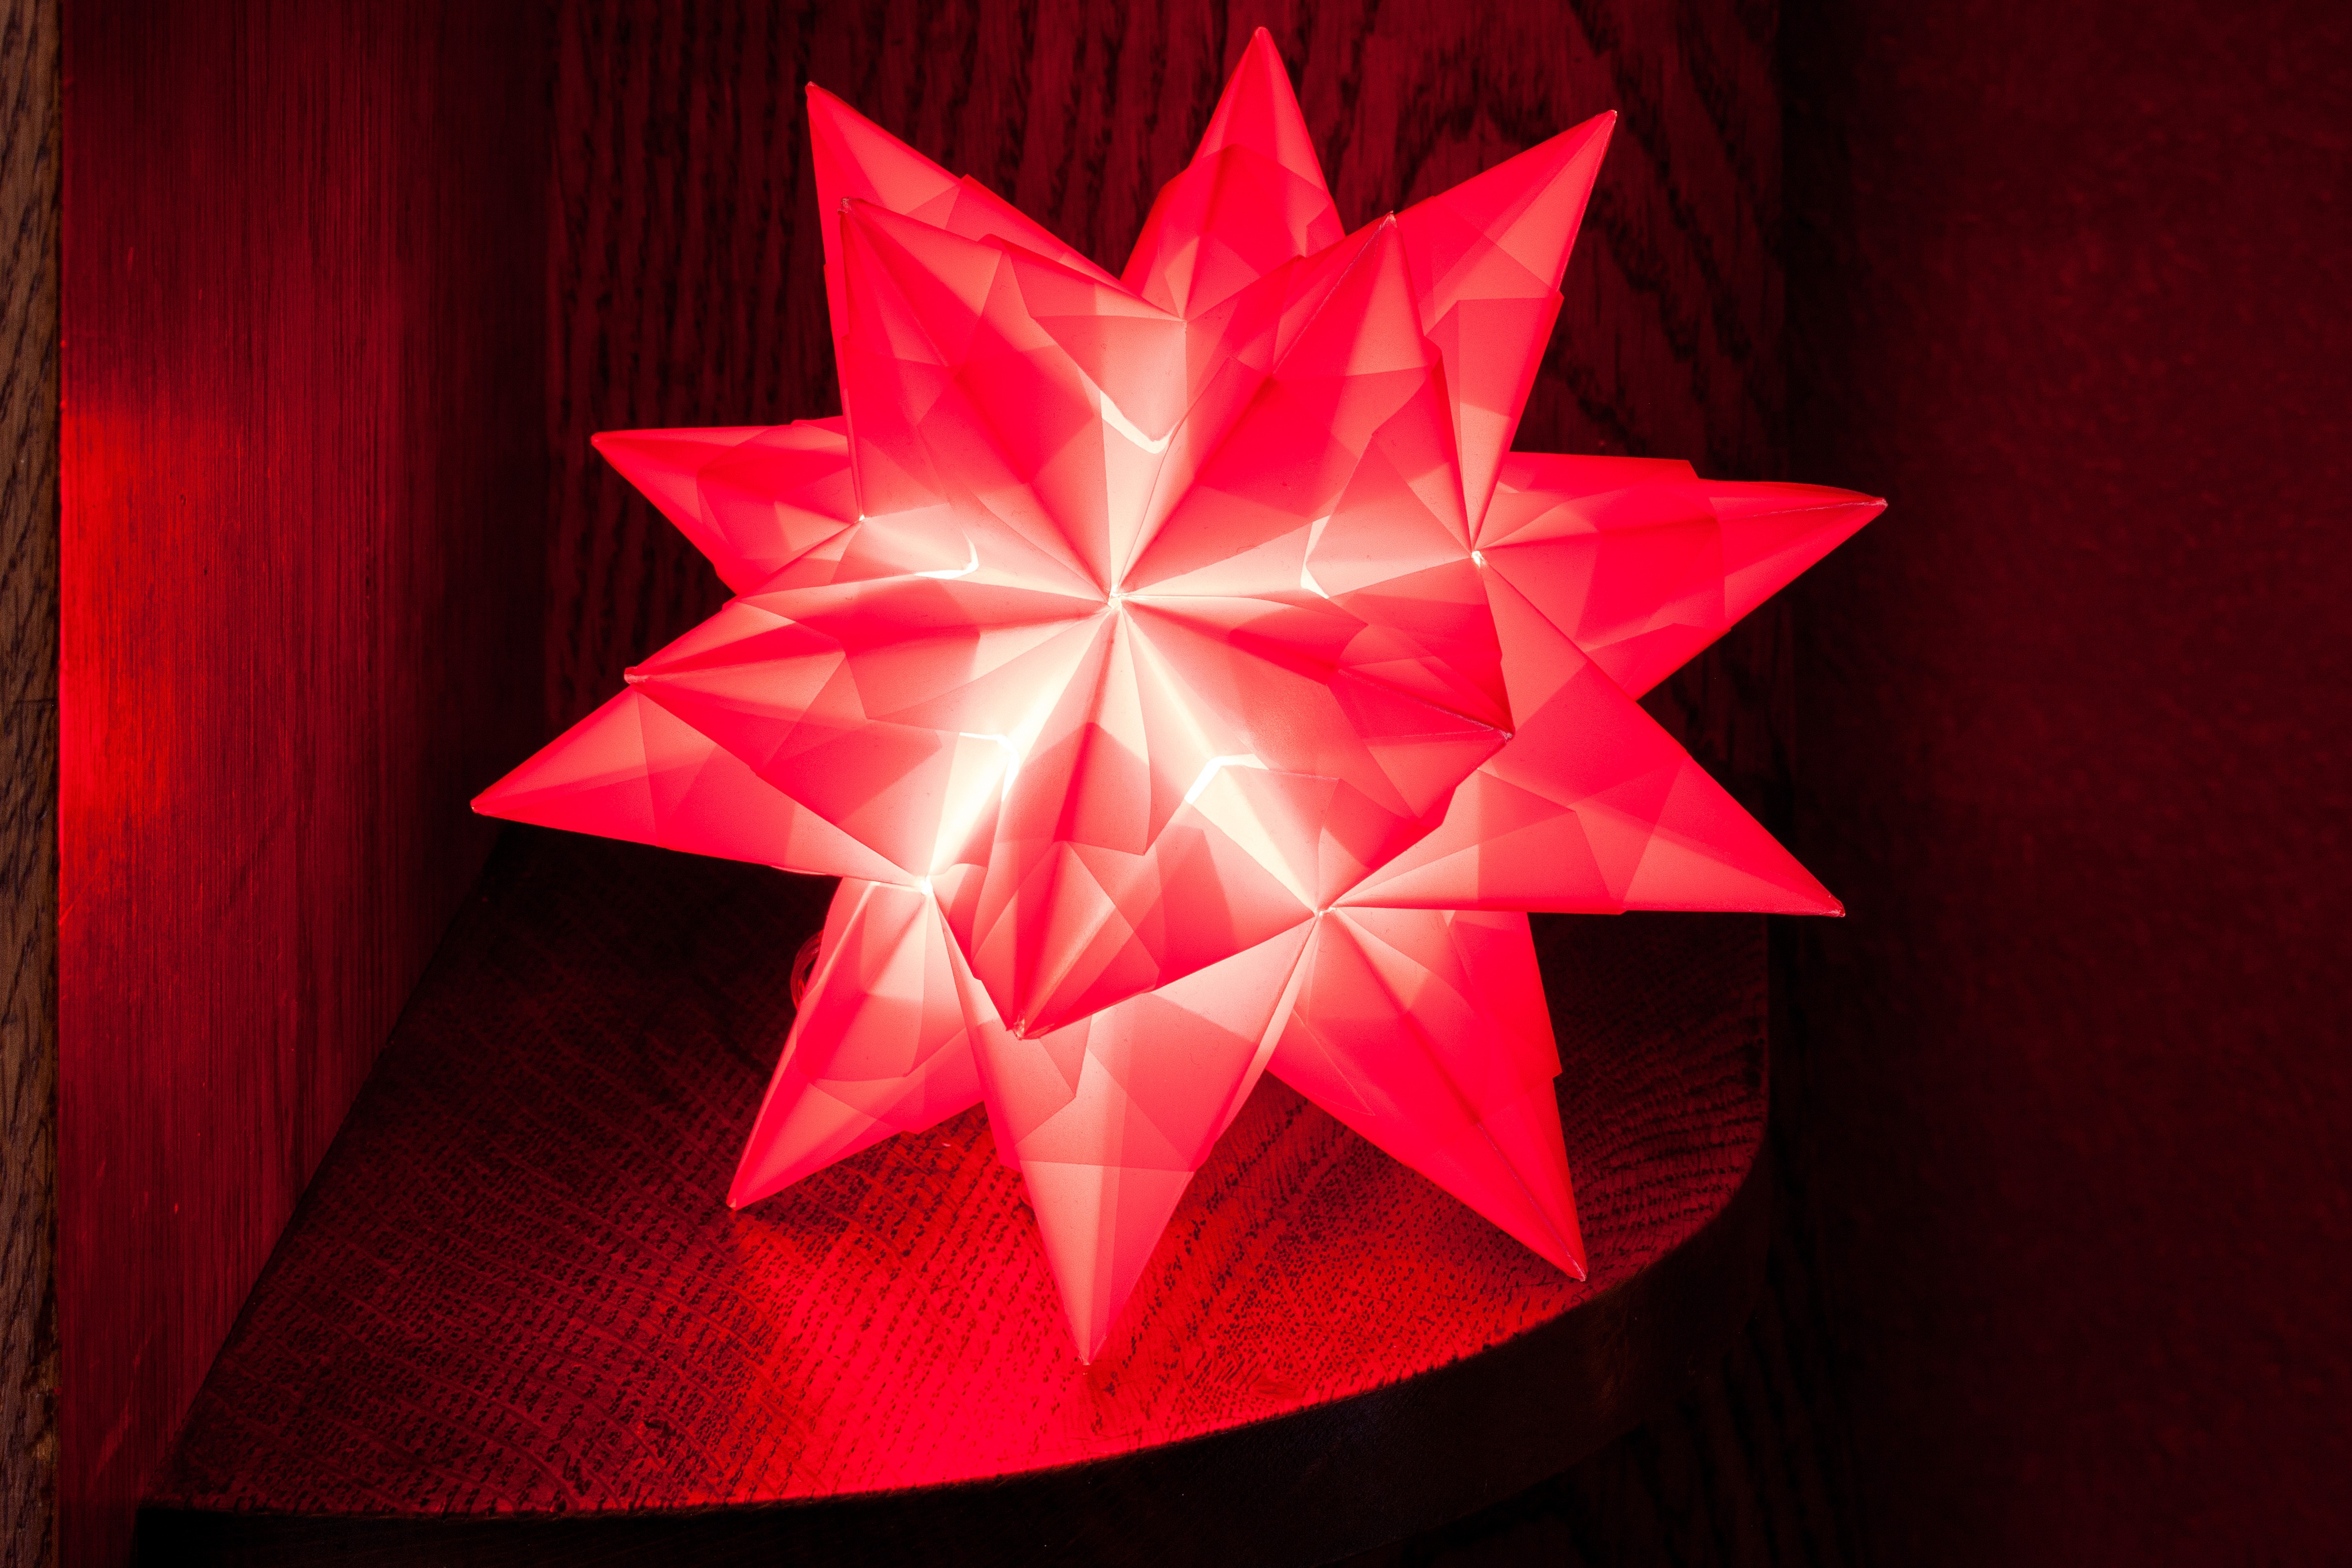 red star table lamp on brown wooden shelf